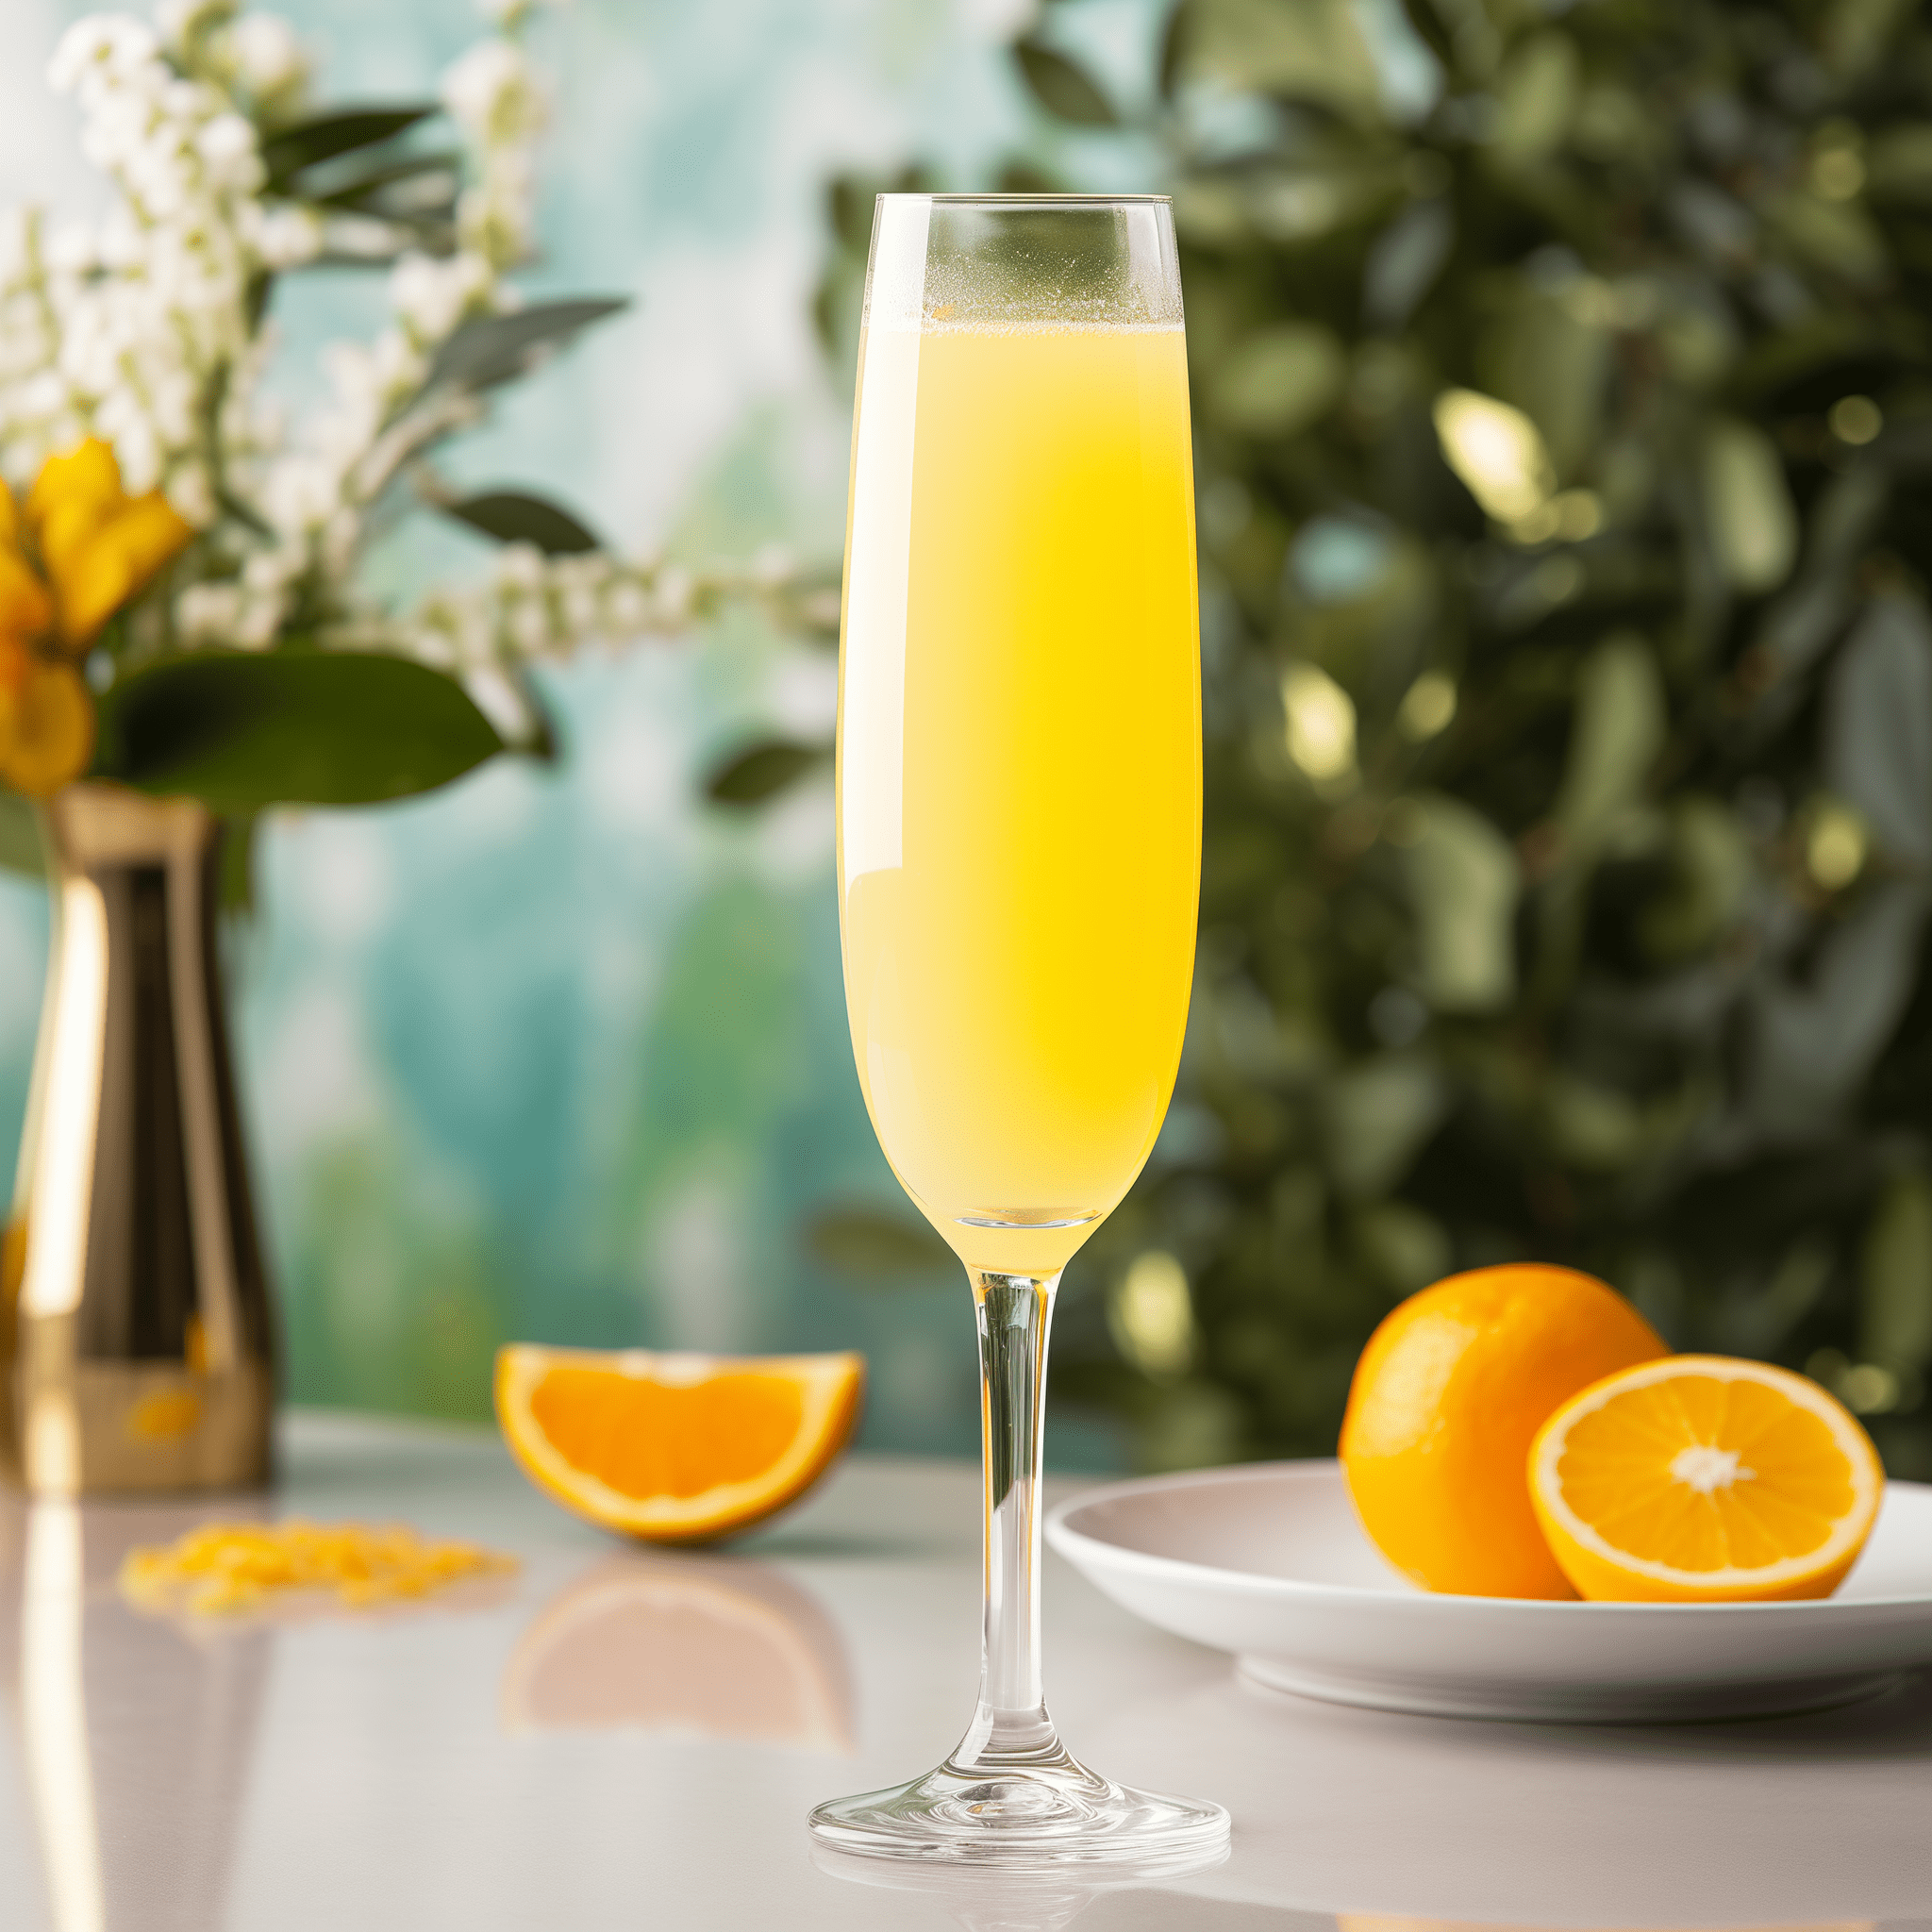 French Mimosa Cocktail Recipe | How to Make the perfect French Mimosa